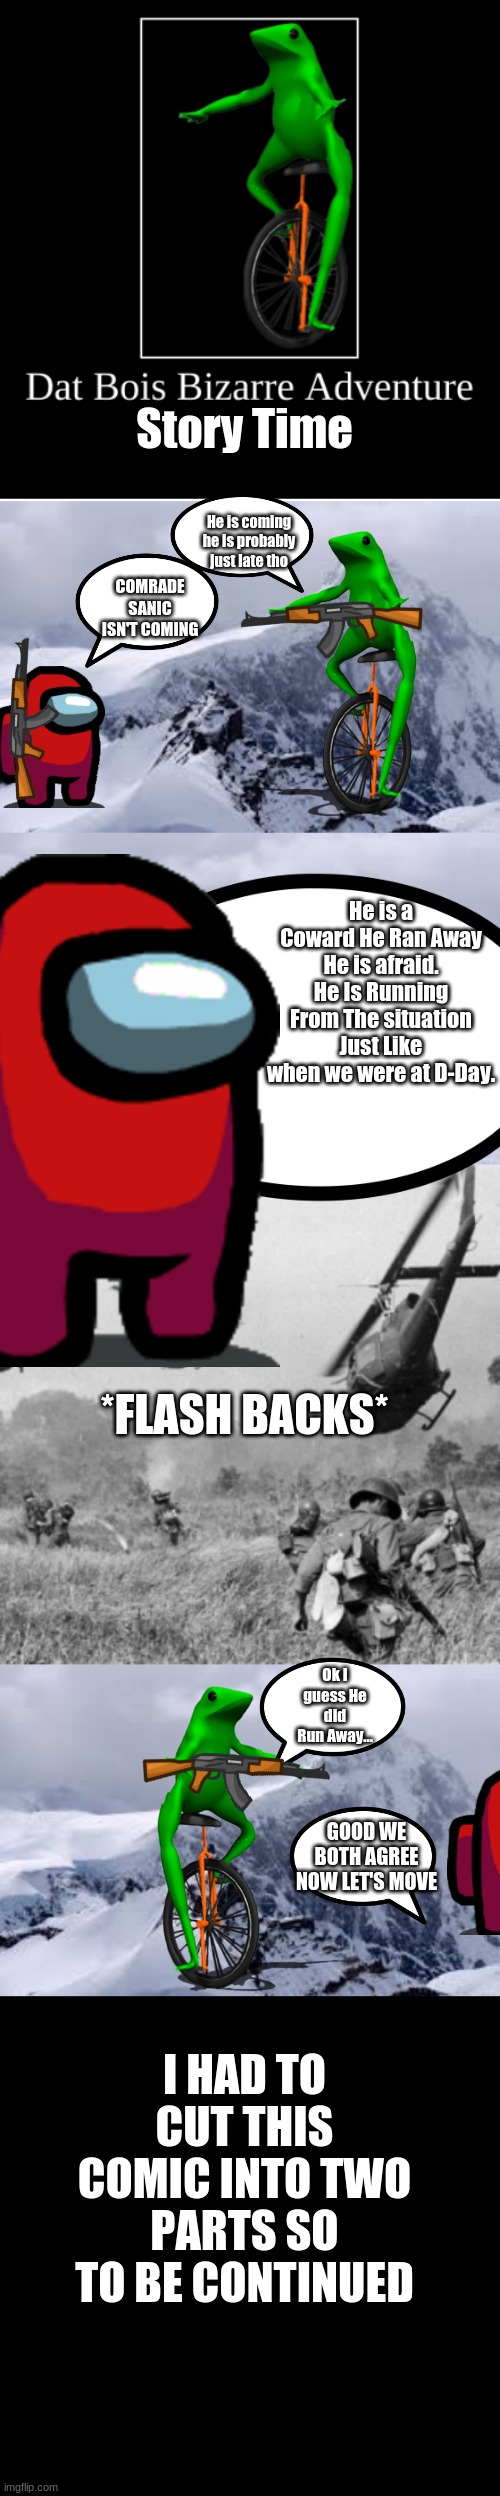 DBBA | Story Time; He is coming he is probably just late tho; COMRADE SANIC ISN'T COMING; He is a Coward He Ran Away He is afraid. He Is Running From The situation Just Like when we were at D-Day. *FLASH BACKS*; Ok I guess He did Run Away... GOOD WE BOTH AGREE NOW LET'S MOVE; I HAD TO CUT THIS COMIC INTO TWO PARTS SO TO BE CONTINUED | image tagged in comics/cartoons,dat boi | made w/ Imgflip meme maker